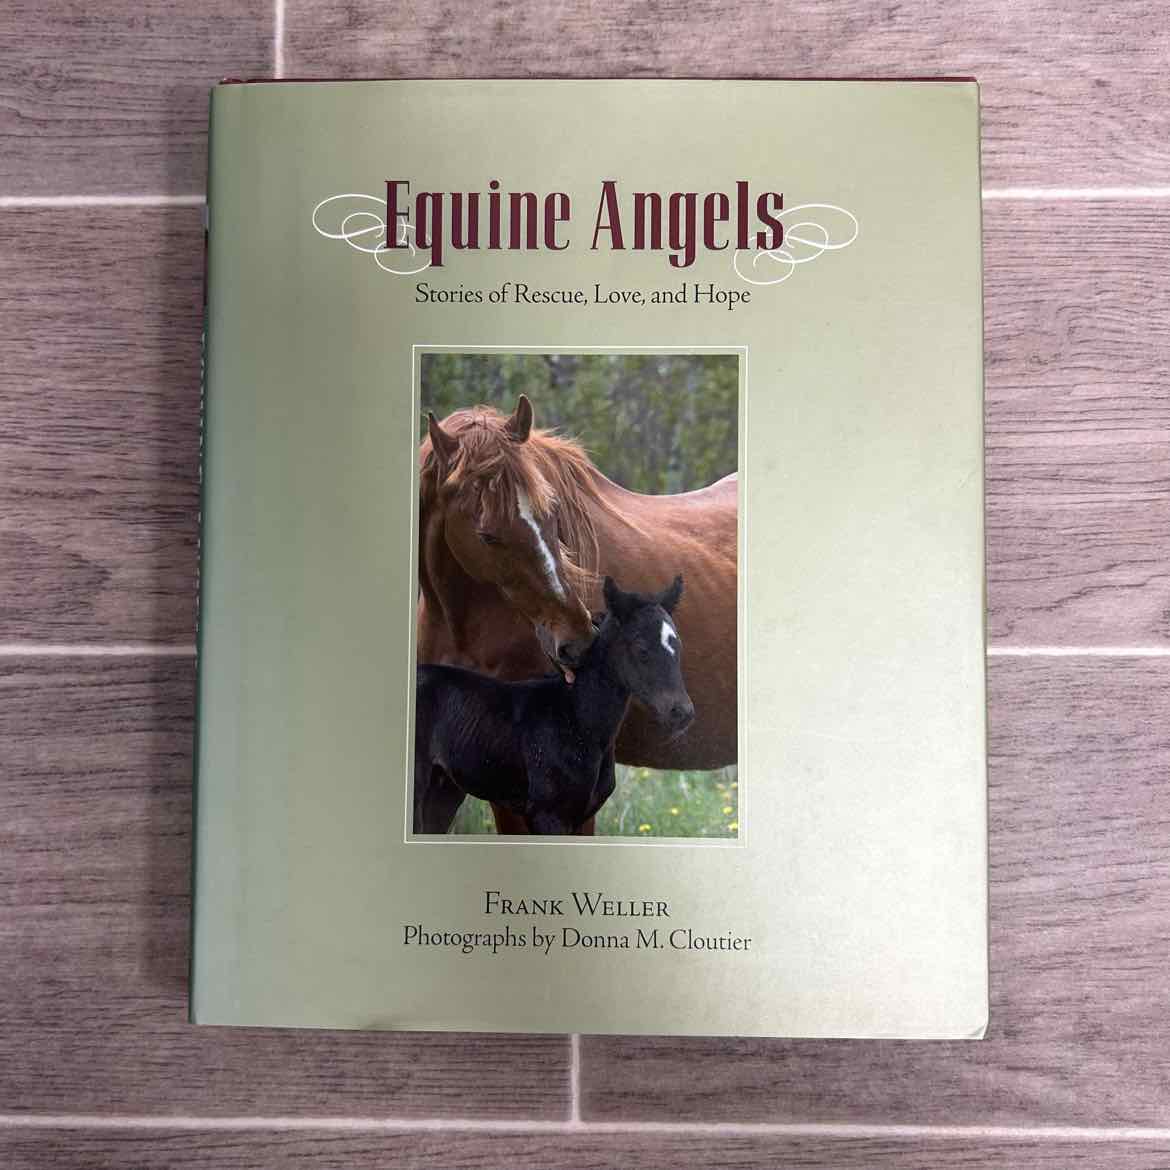 Equine Angels Stories of Rescue, Love, & Hope by Frank Weller